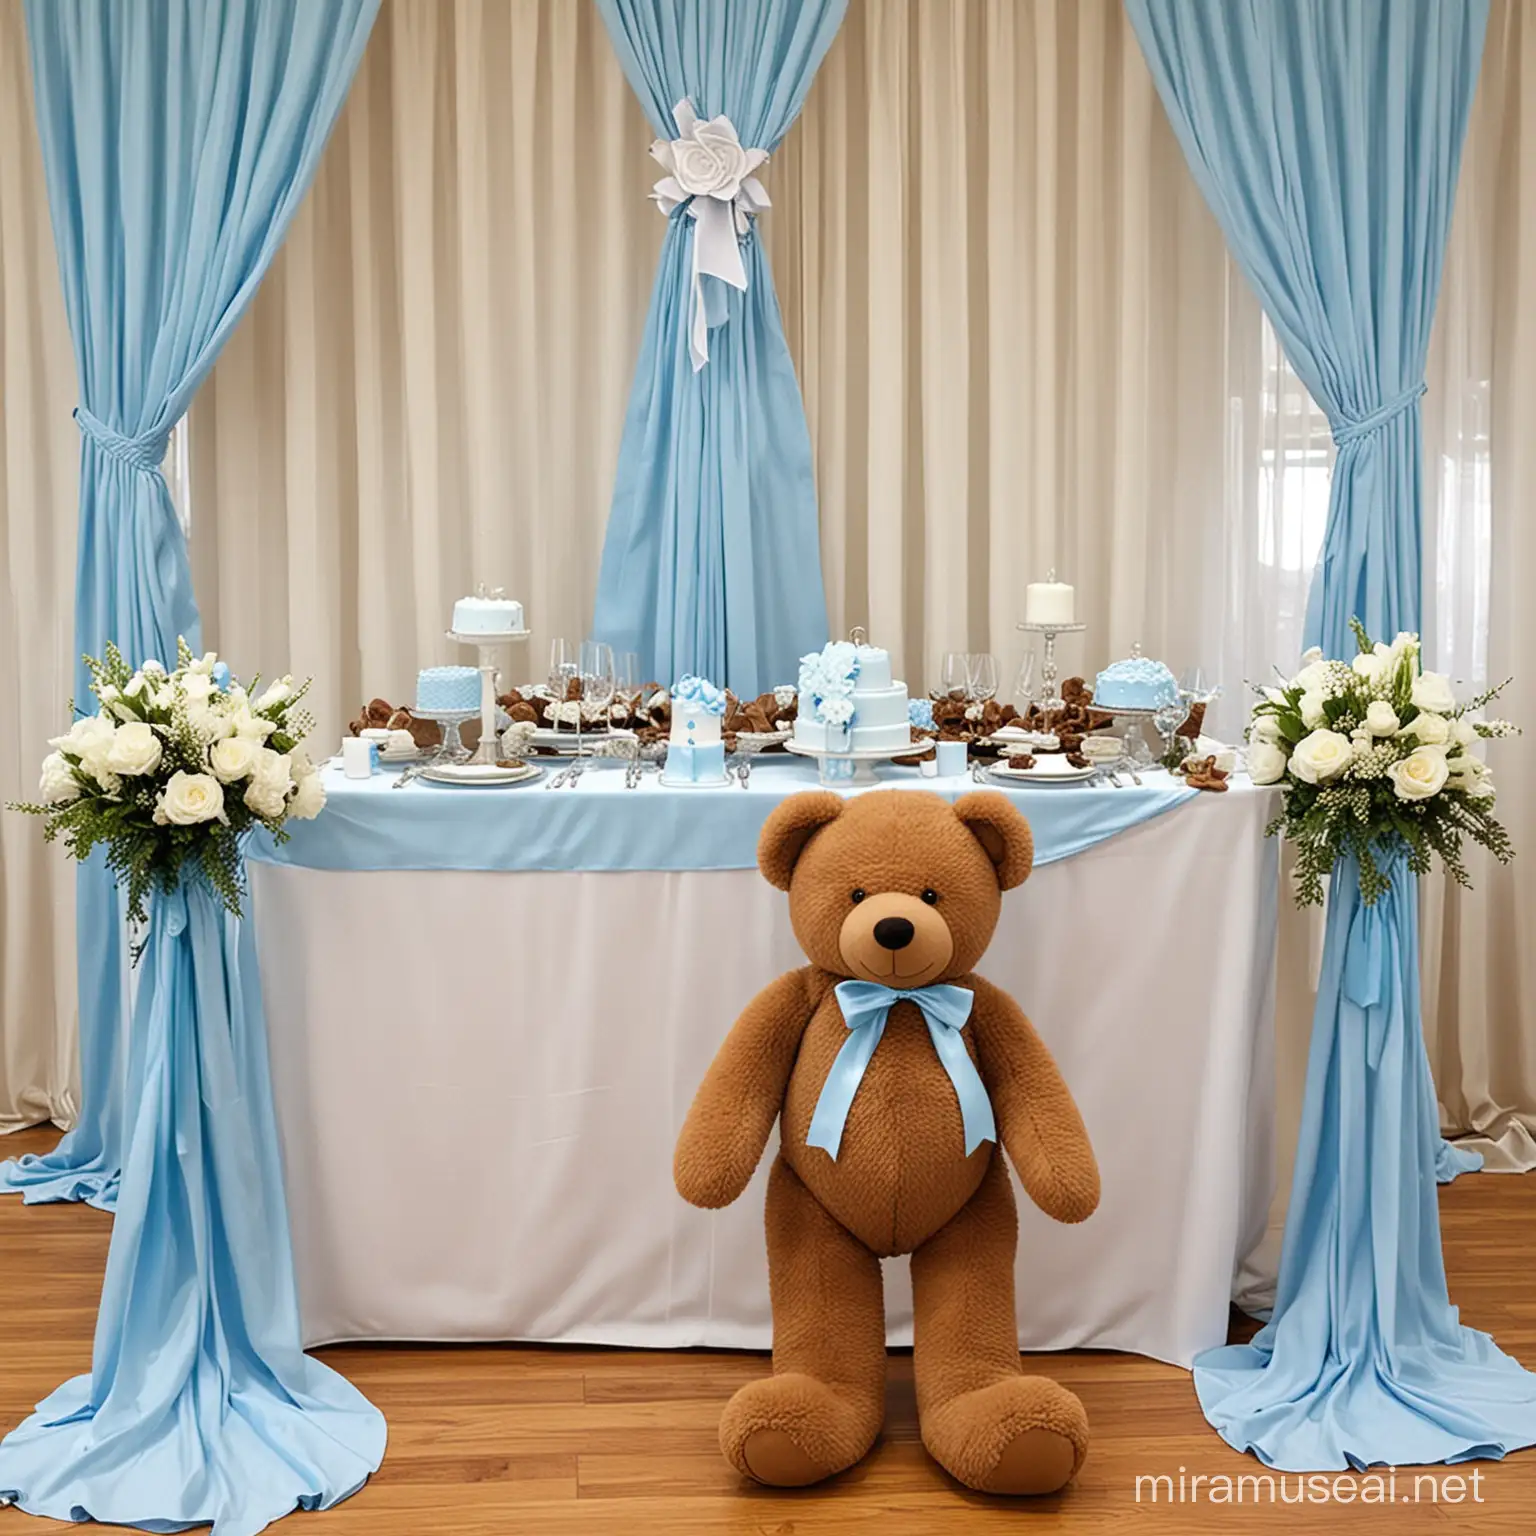 Blue and White Themed Teddy Bear Birthday Party